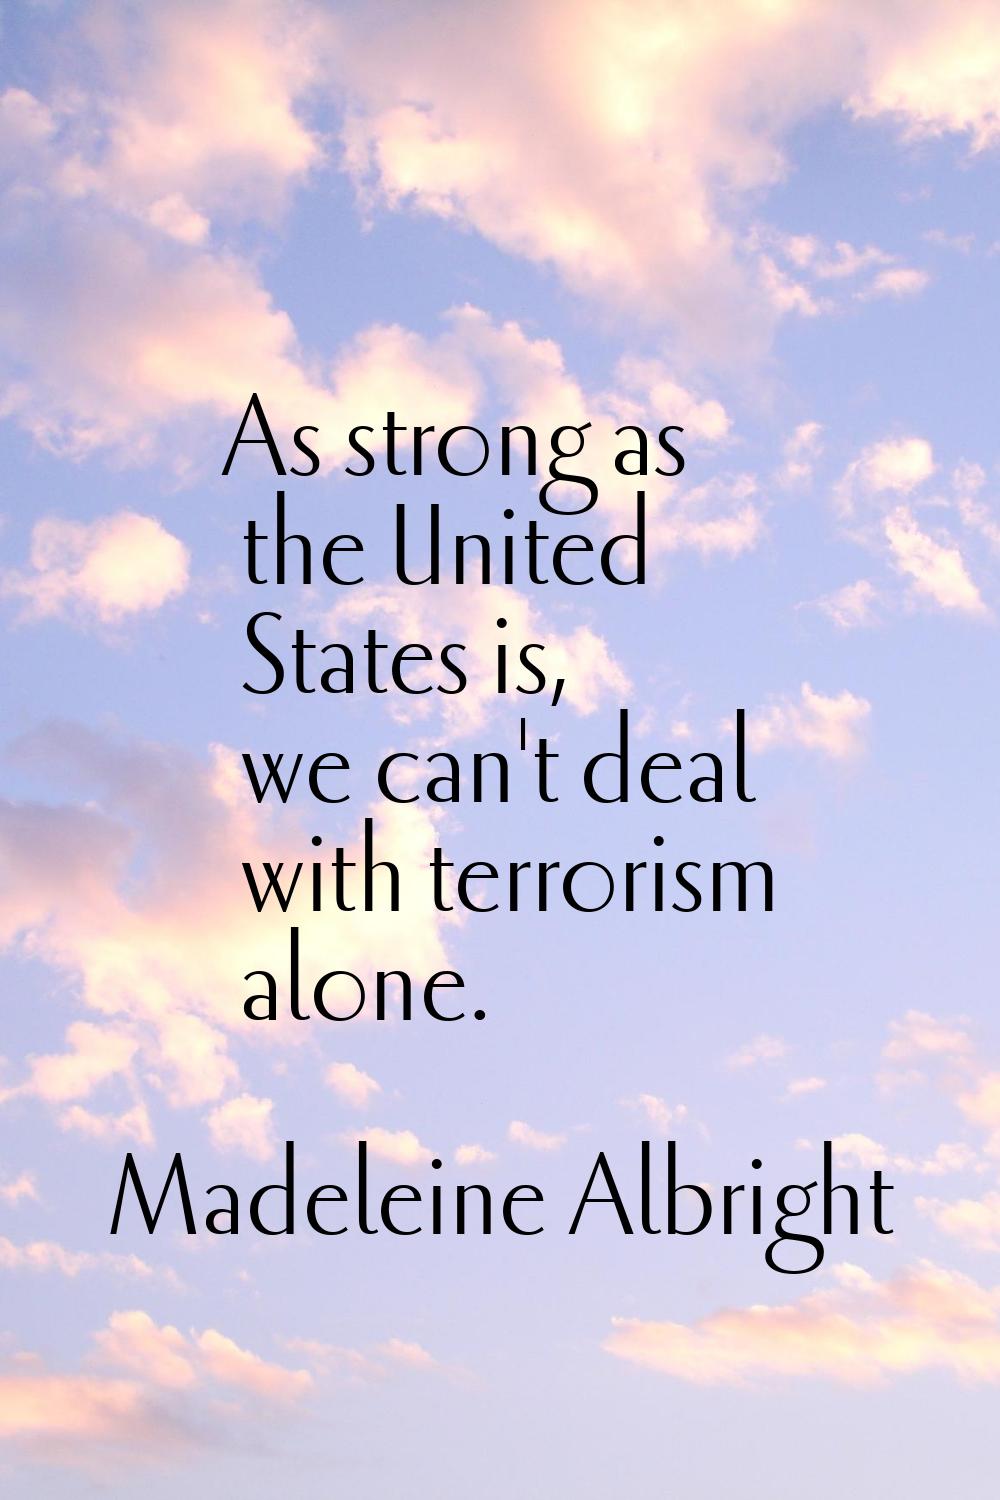 As strong as the United States is, we can't deal with terrorism alone.